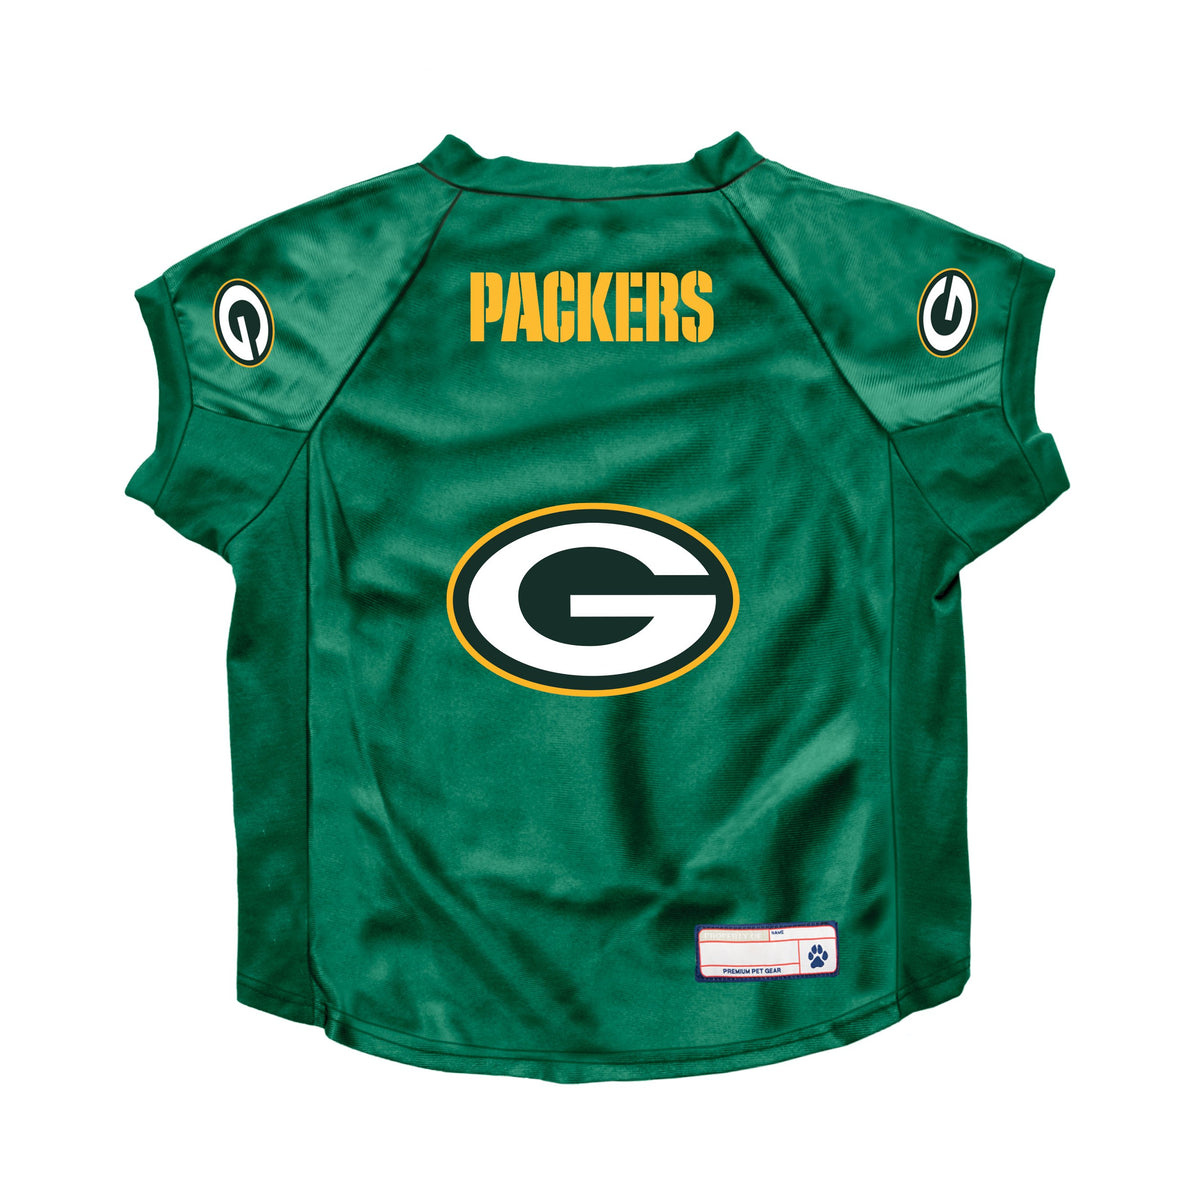 packer jersey for dog